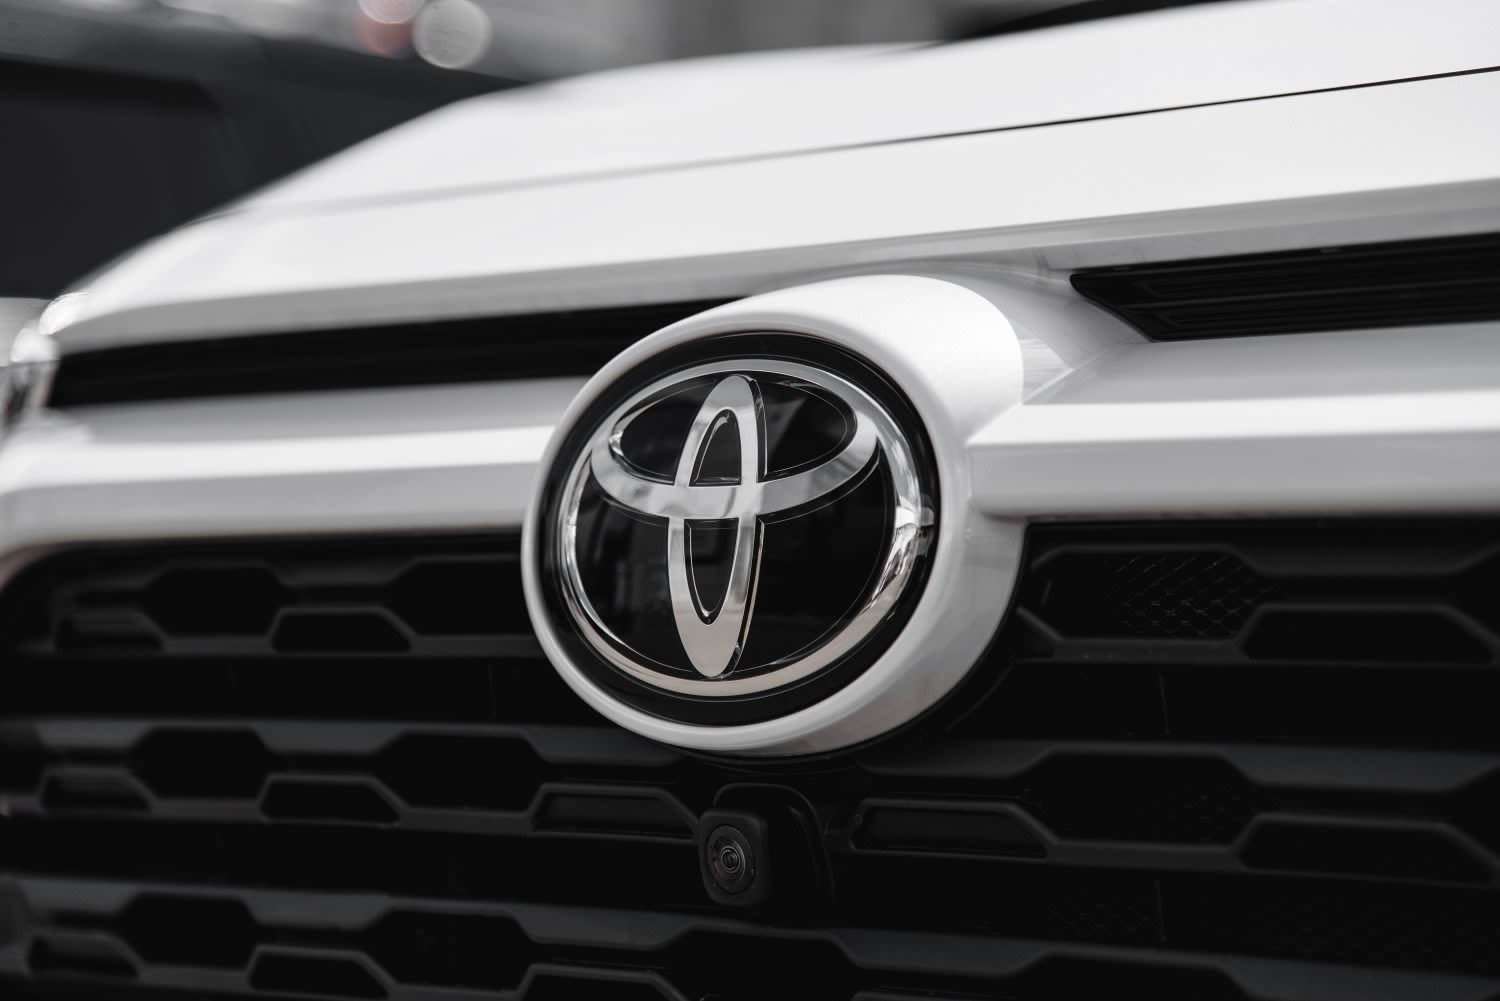 Toyota's global production plummets amid certification scandal and price war in China